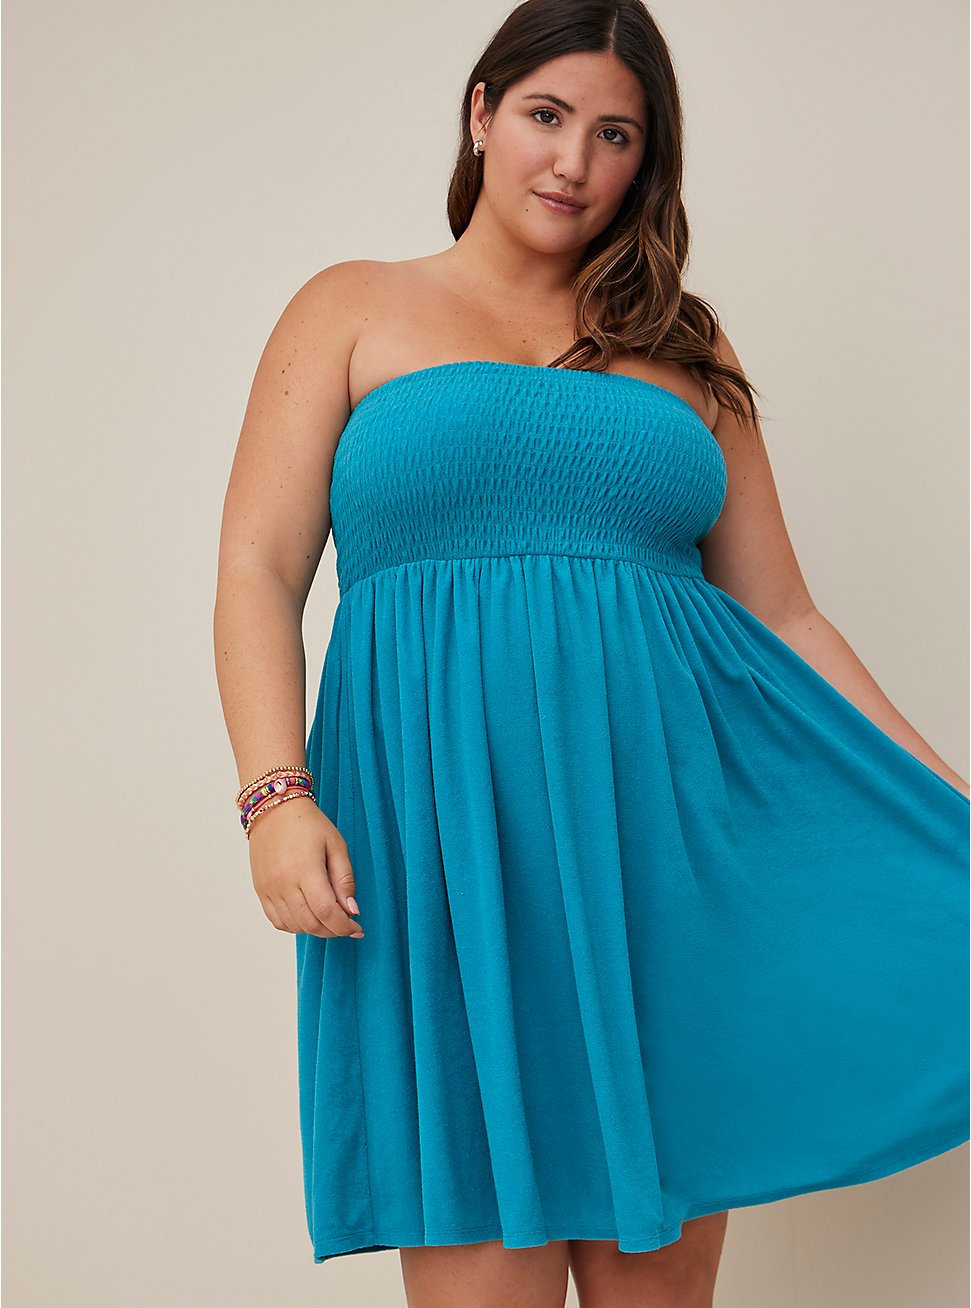 Smocked Strapless Dress Cover-Up - Terry Blue, TEAL, hi-res